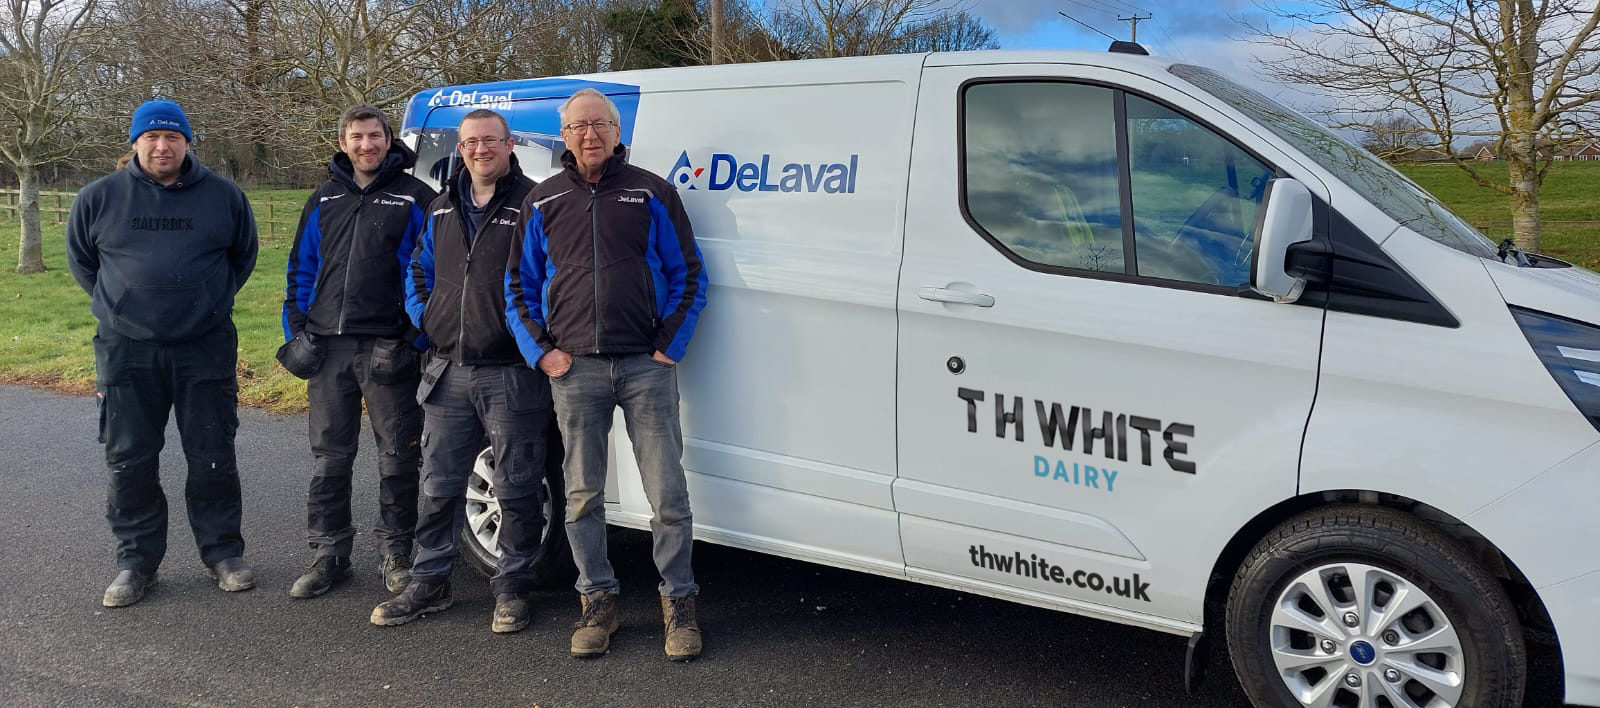 T H WHITE DeLaval territory now stretches from Coast to Coast